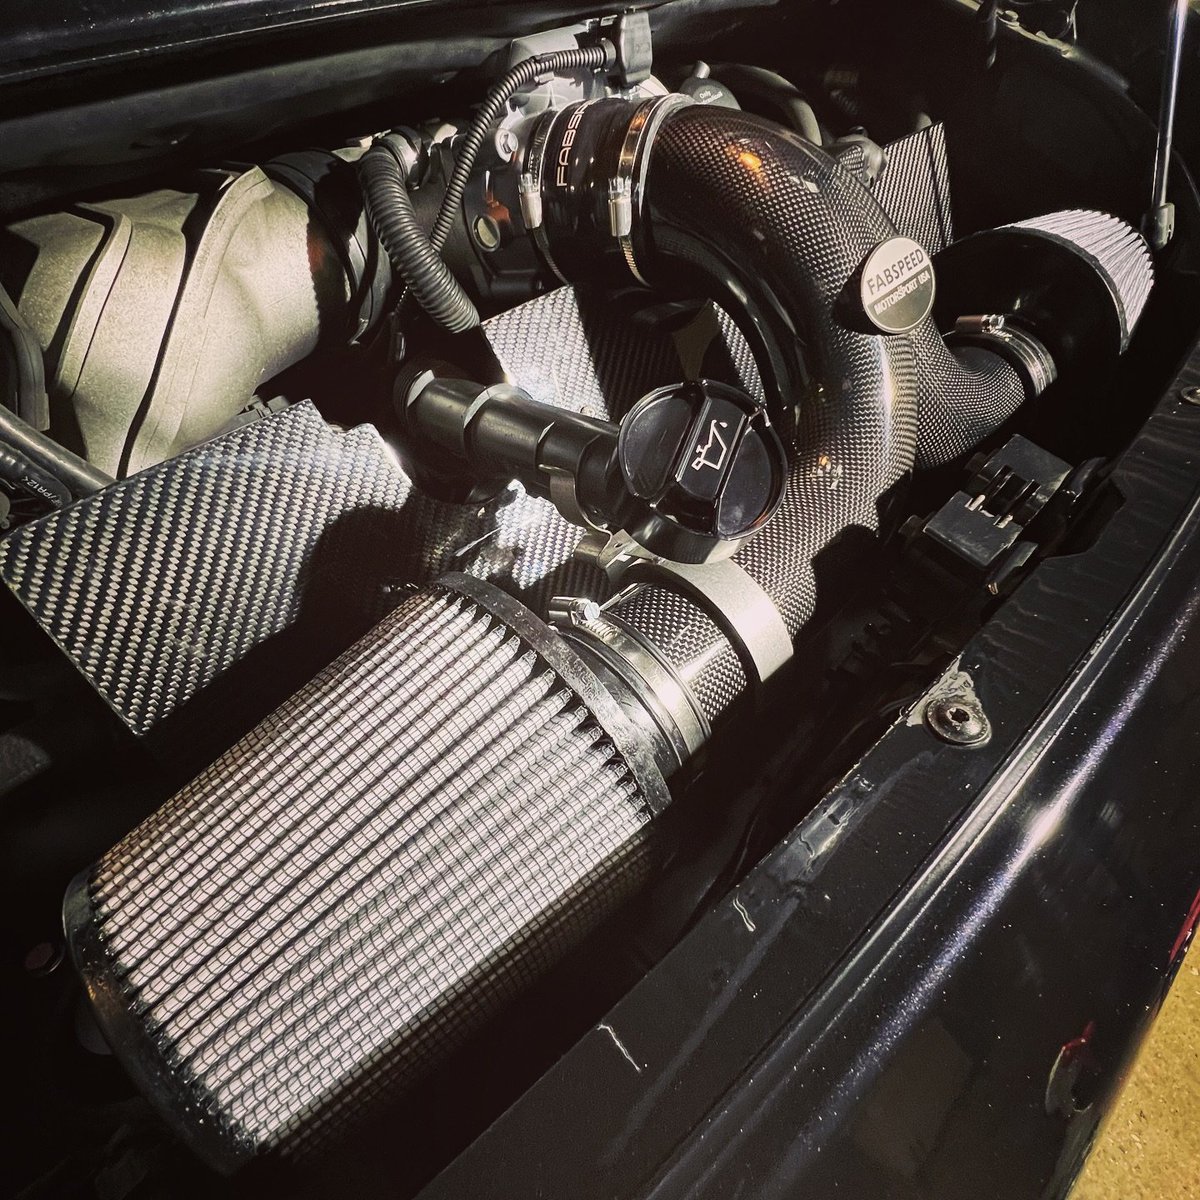 Installed a Fabspeed Motorsport carbon-fibre competition intake system to go with my 911’s GT3 throttle body and IPD competition plenum. Extra punch and plenty more noise under load. Fantastic workmanship. ECU tweak on the horizon. 🏁 #porsche911